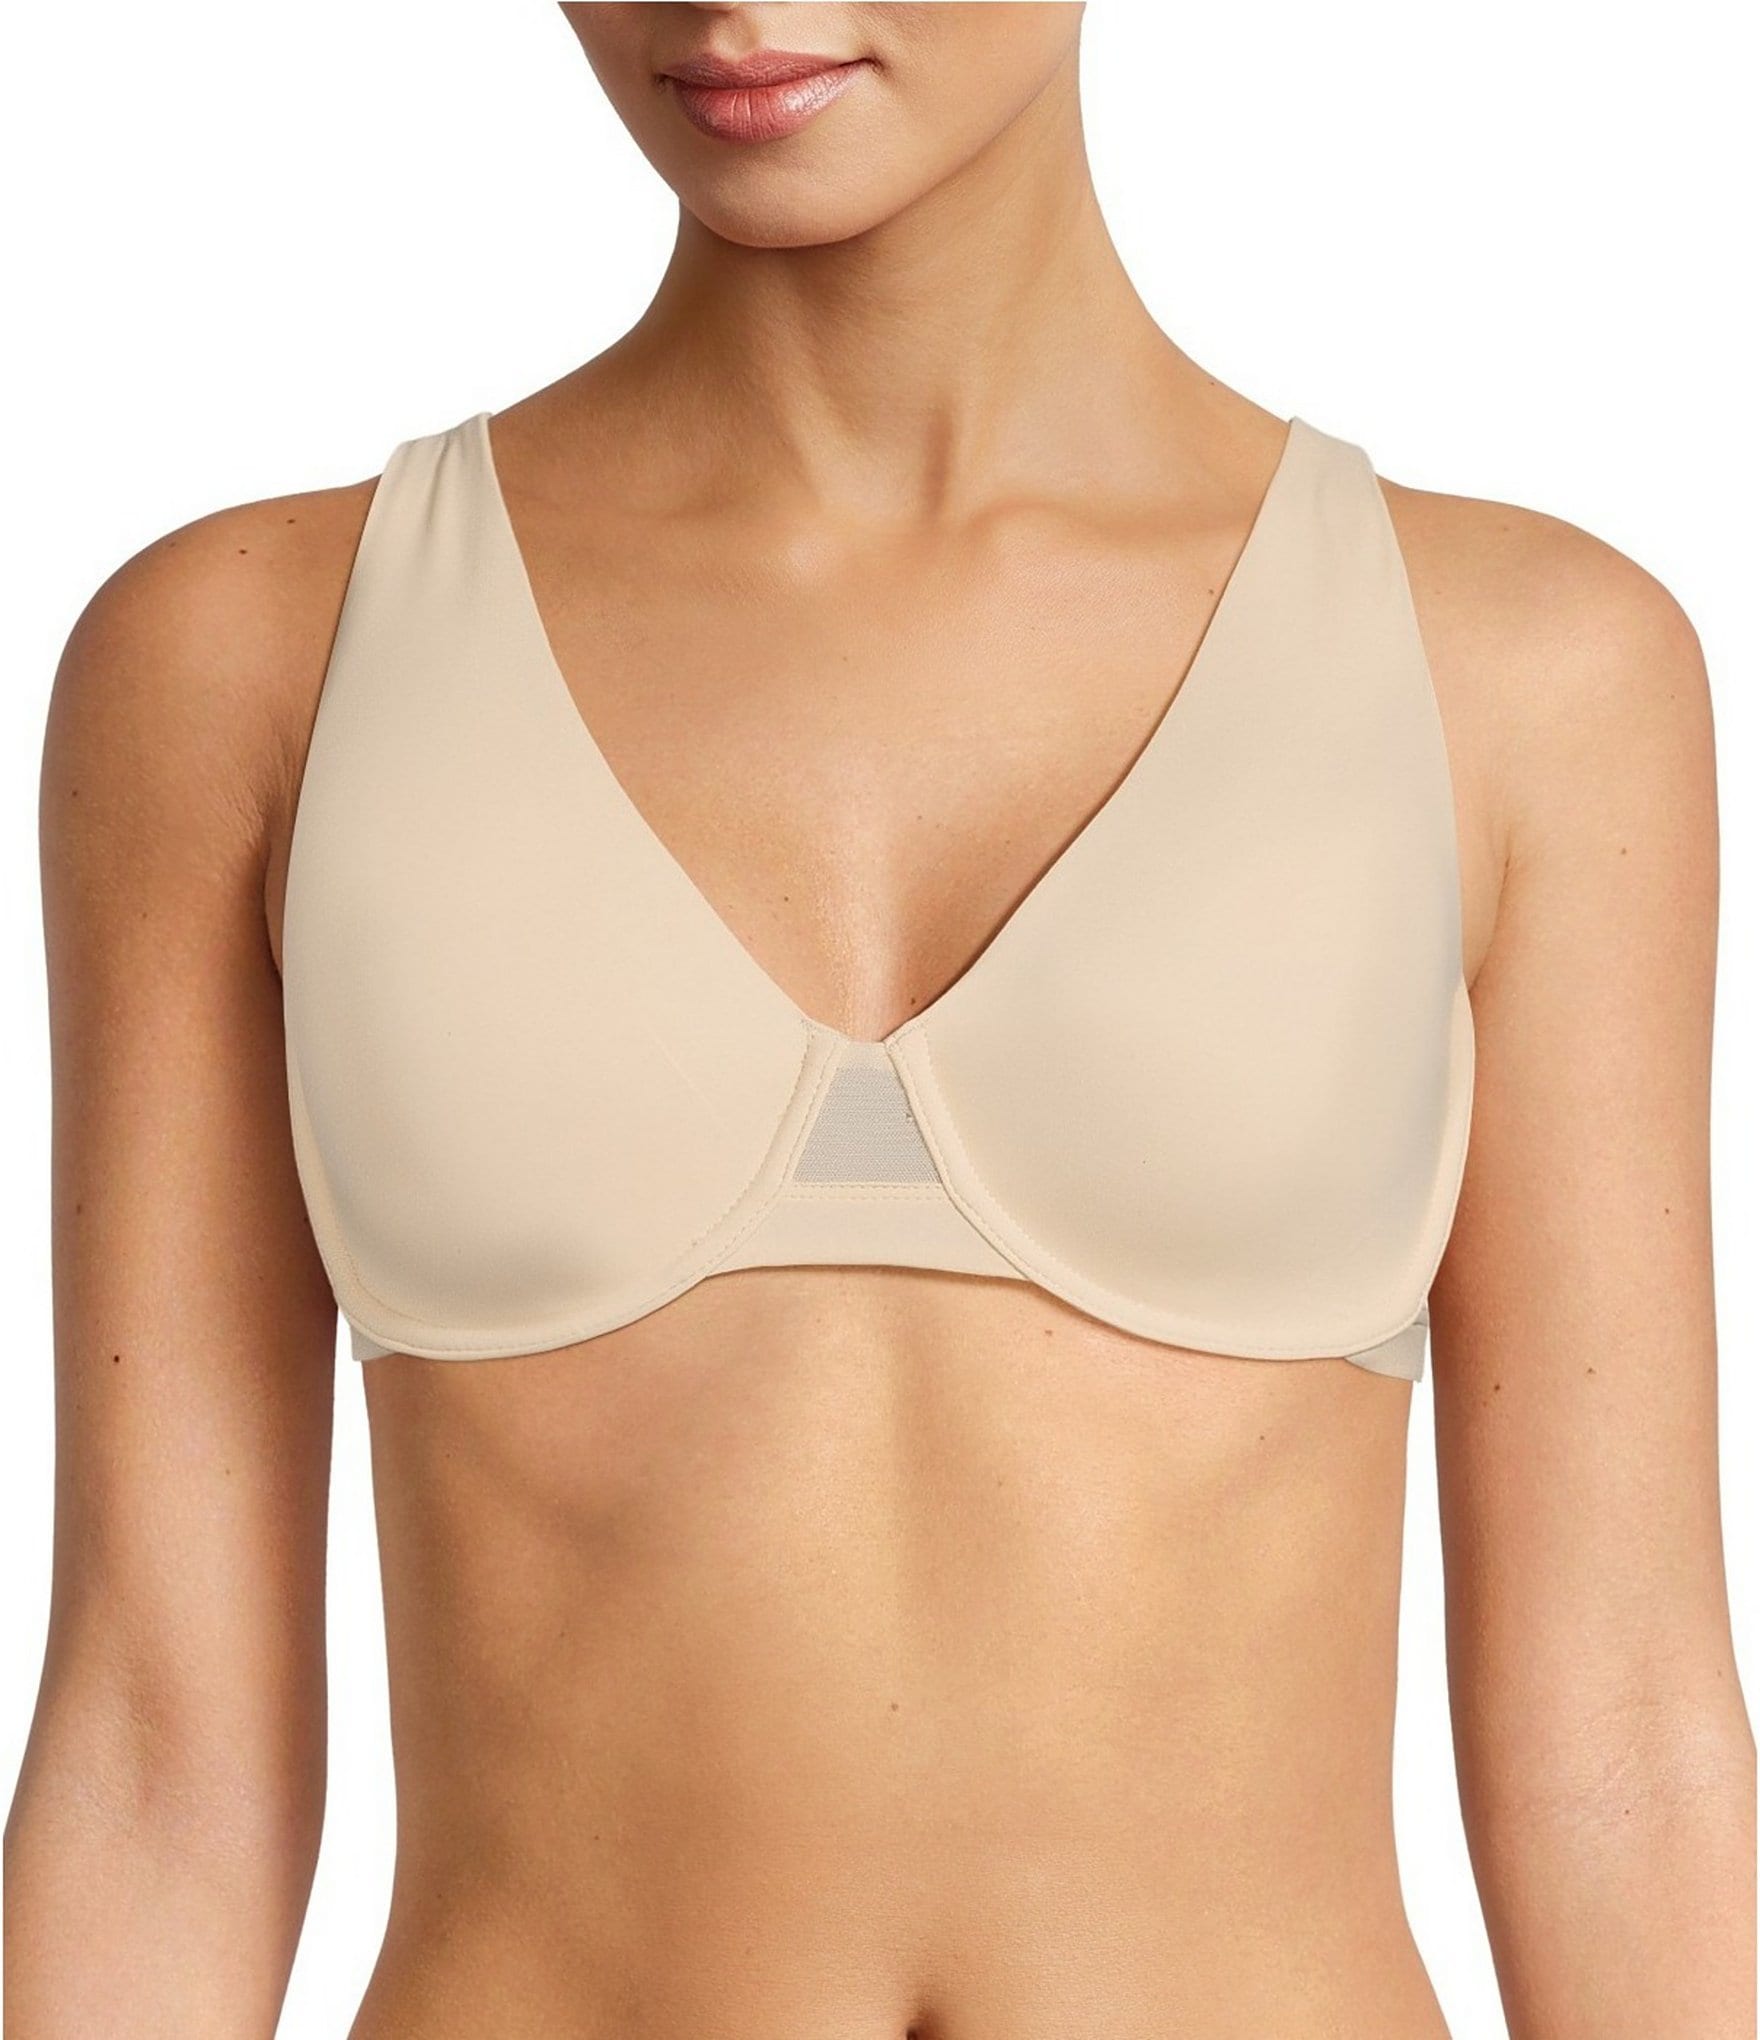 woman clearance: Bras: Push Ups, Lace & Strapless